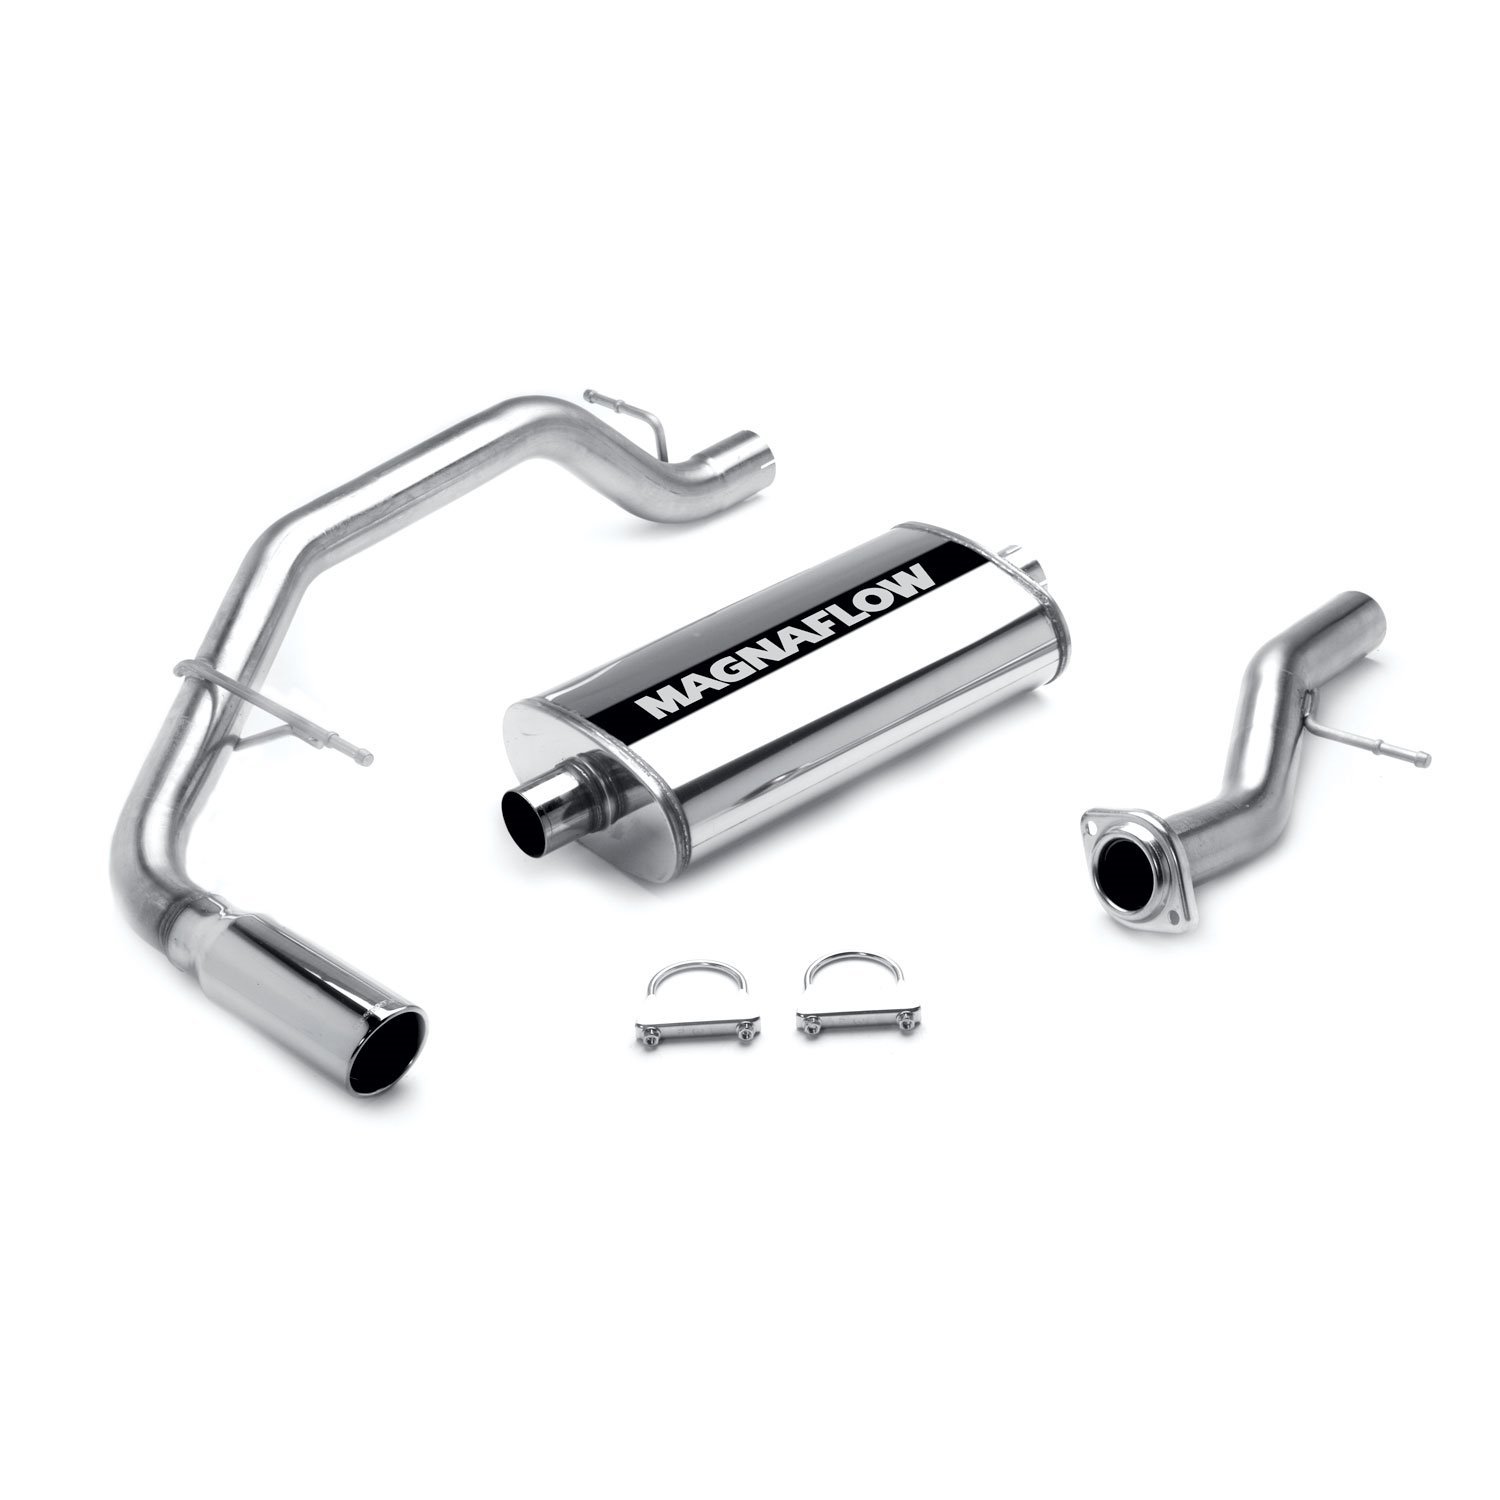 MF Series Cat-Back Exhaust System 2002-2005 Cadillac Escalade 5.3L V8